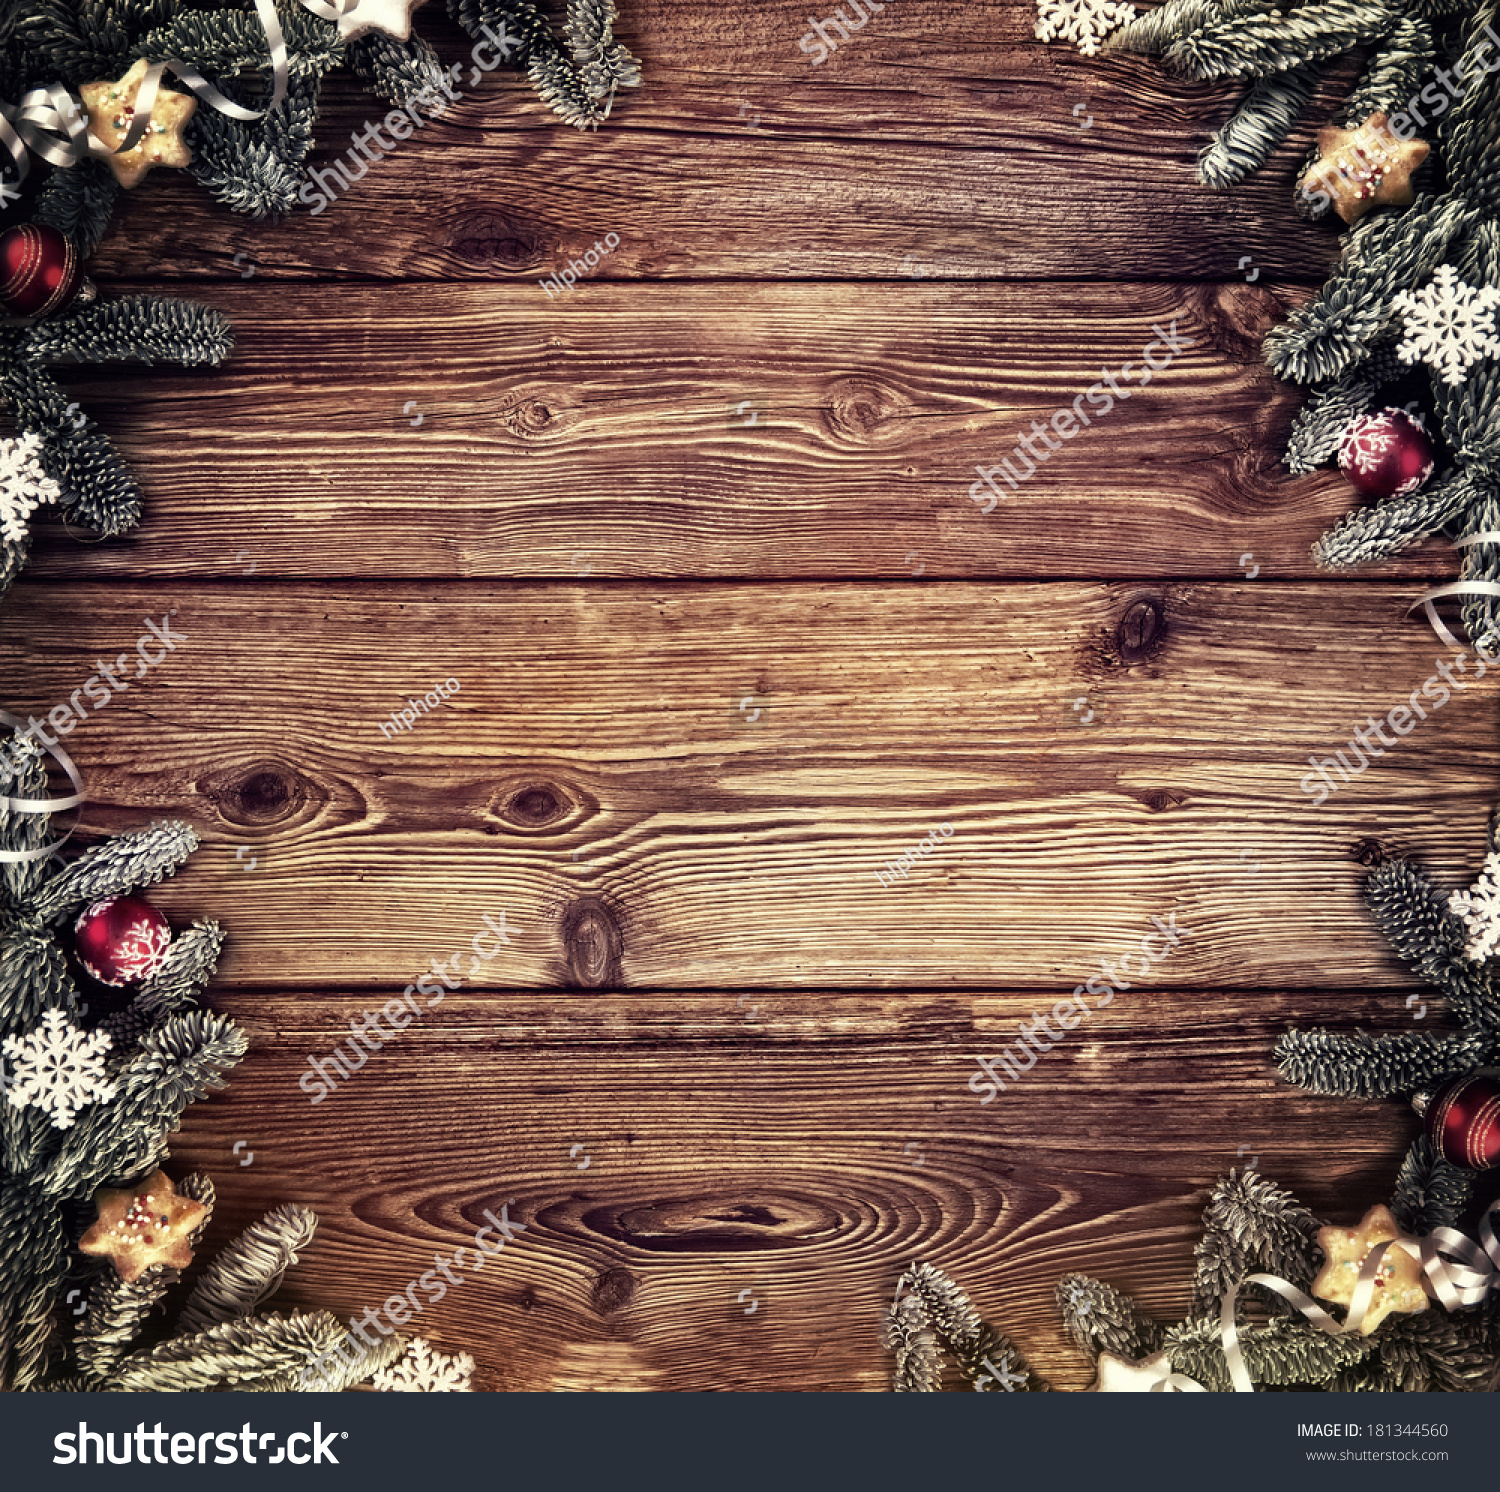 Wooden Board With Decoration Stock Photo 181344560 : Shutterstock